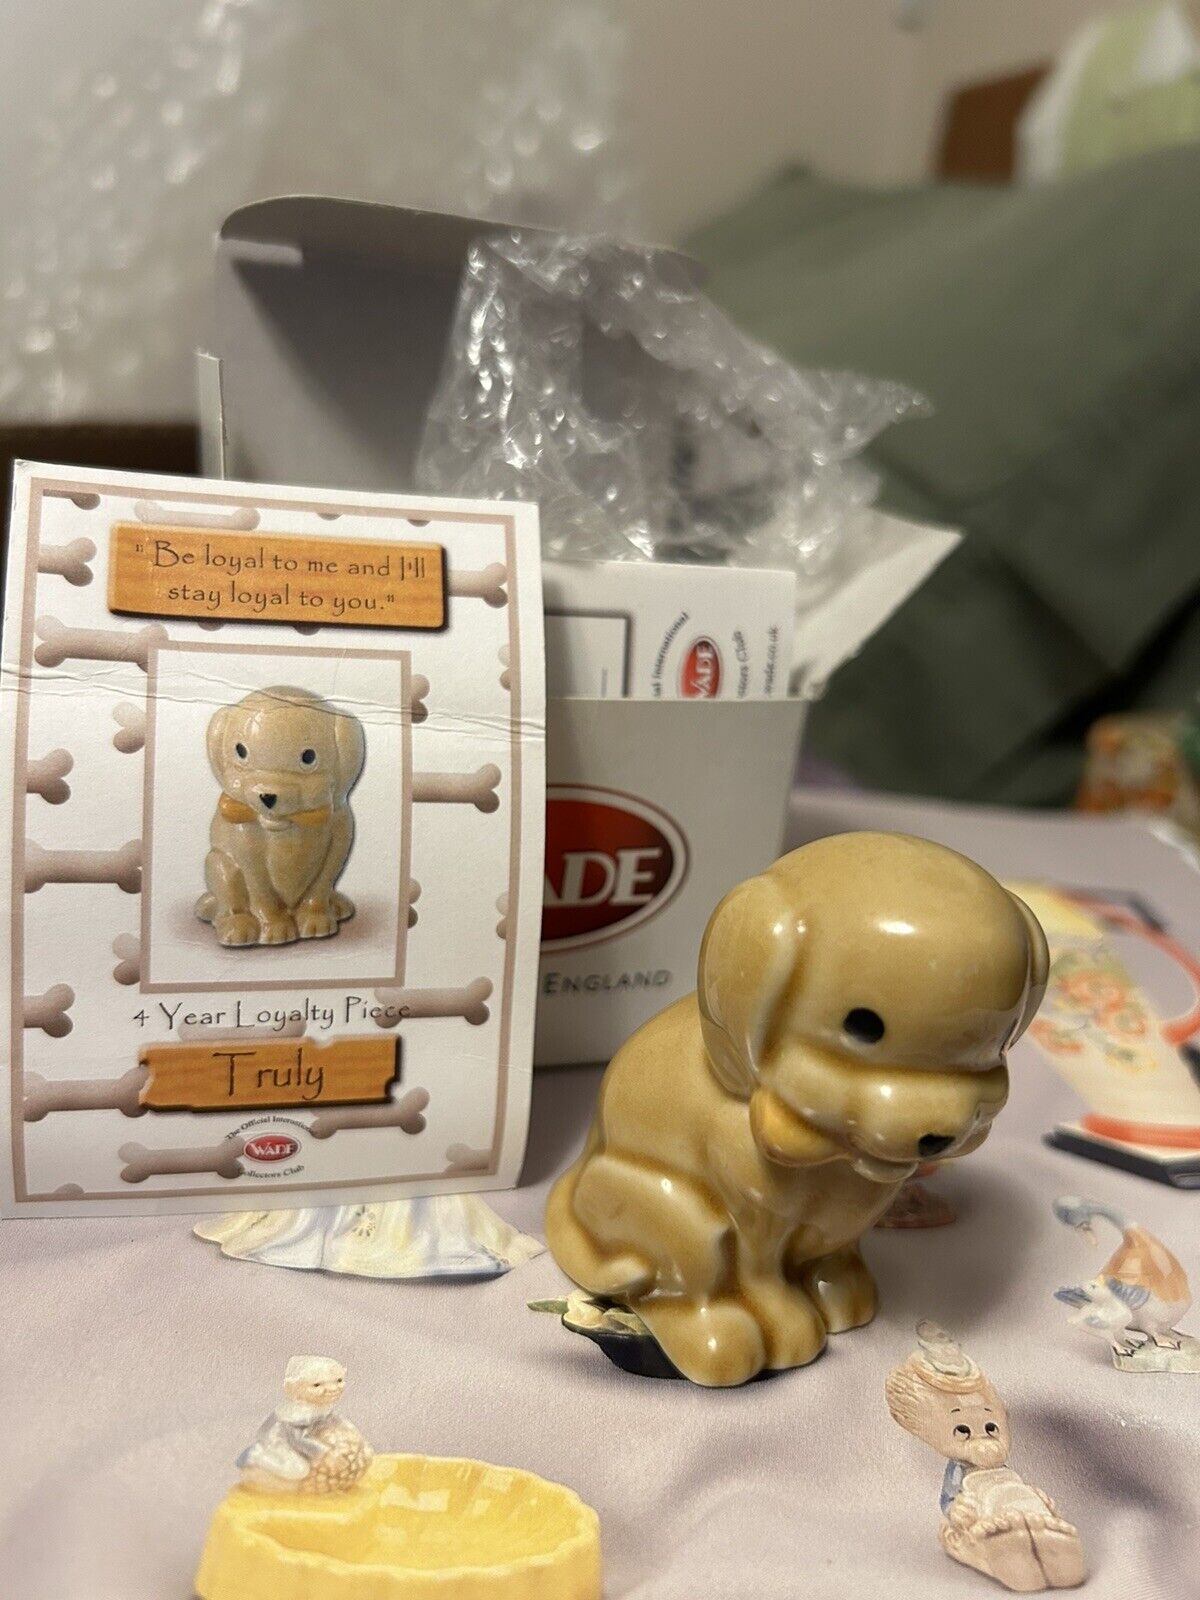 Trudy the puppy figurine Wade whimsies